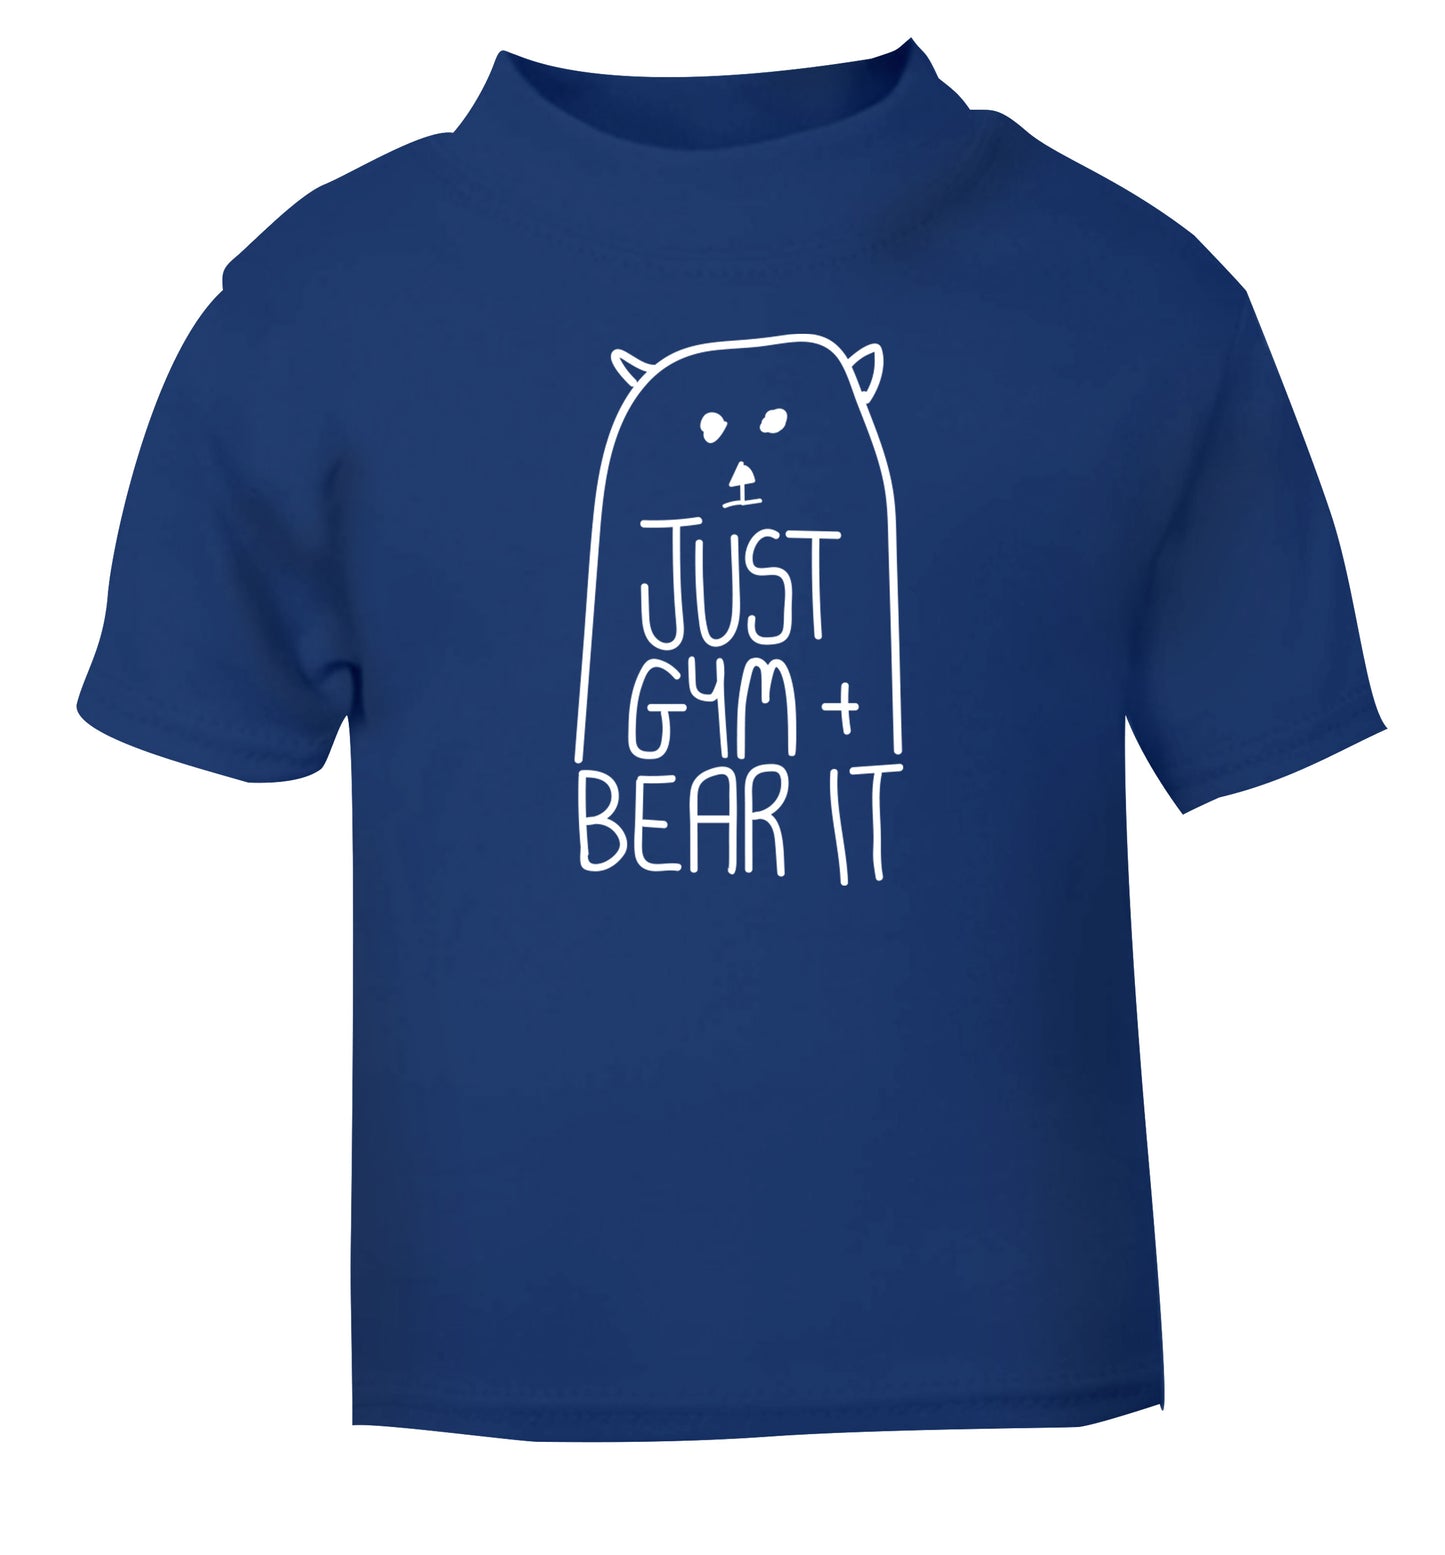 Just gym and bear it blue Baby Toddler Tshirt 2 Years